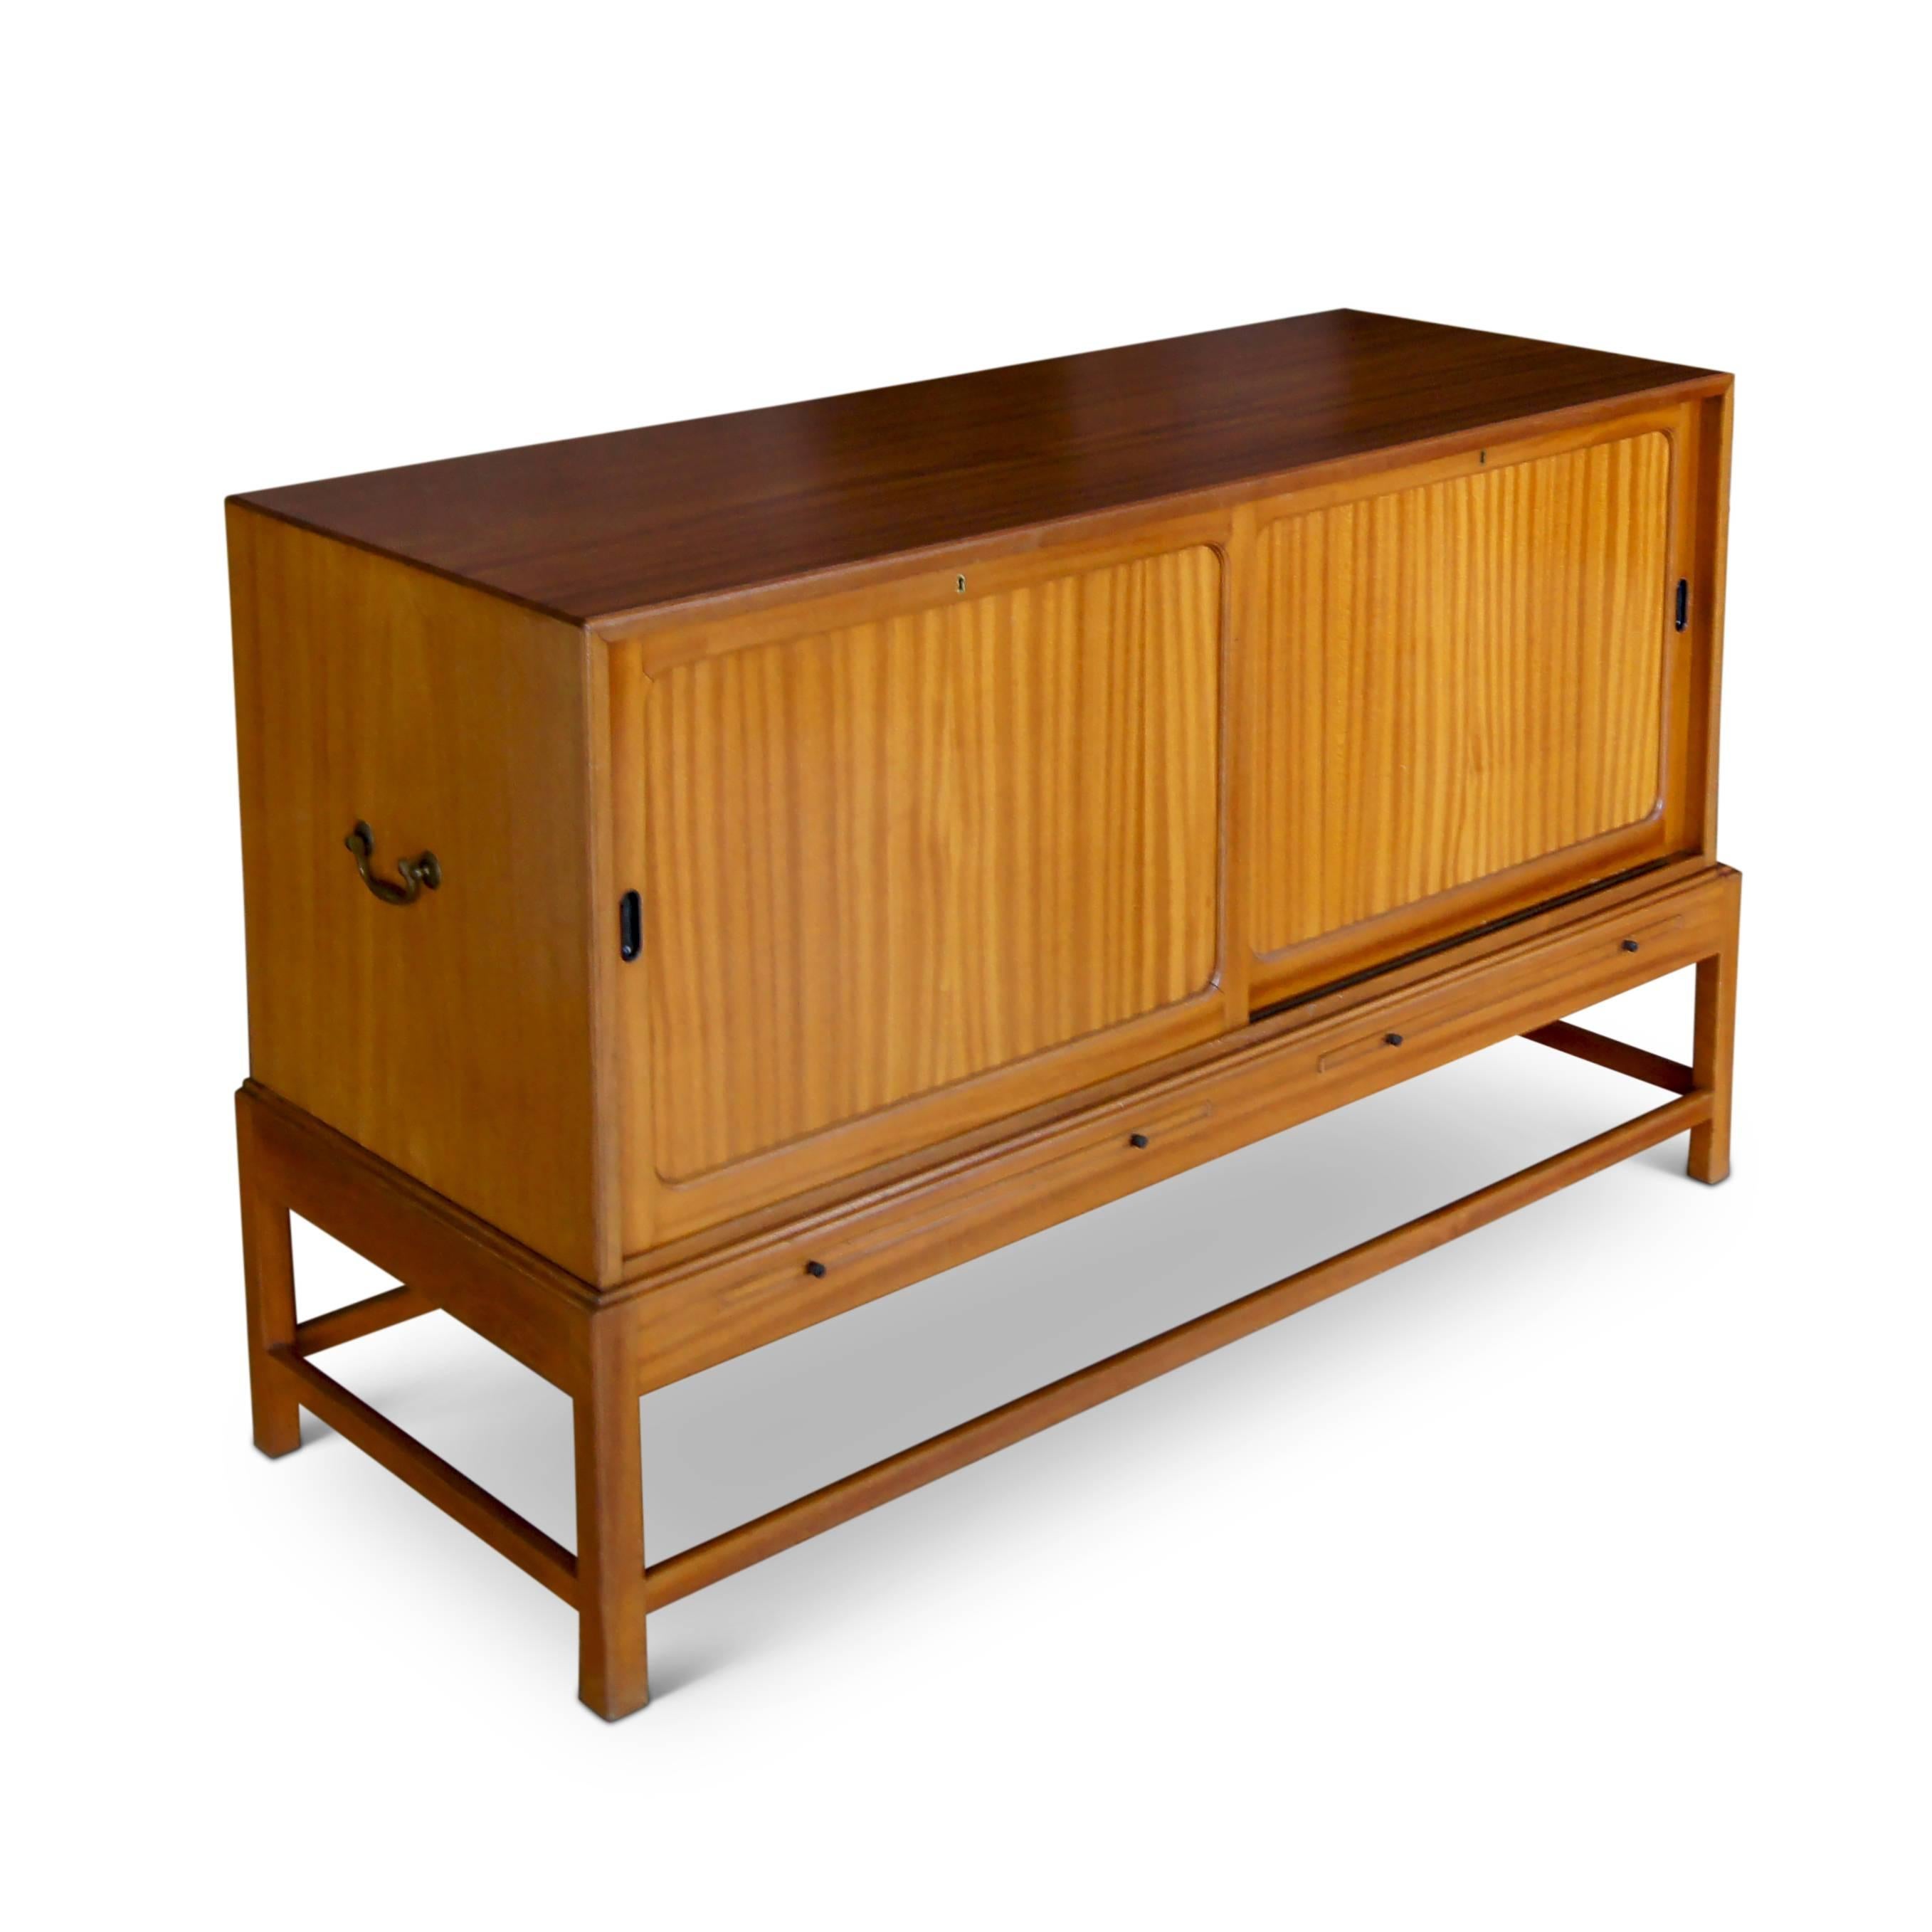 Sideboard, model no. 4122, designed by Kaare Klint (1888-1954) consisting of a cabinet with two sliding doors opening to reveal adjustable shelf or drawers with retractable tray surfaces under each side, on an articulated stand (cabinet and Stand